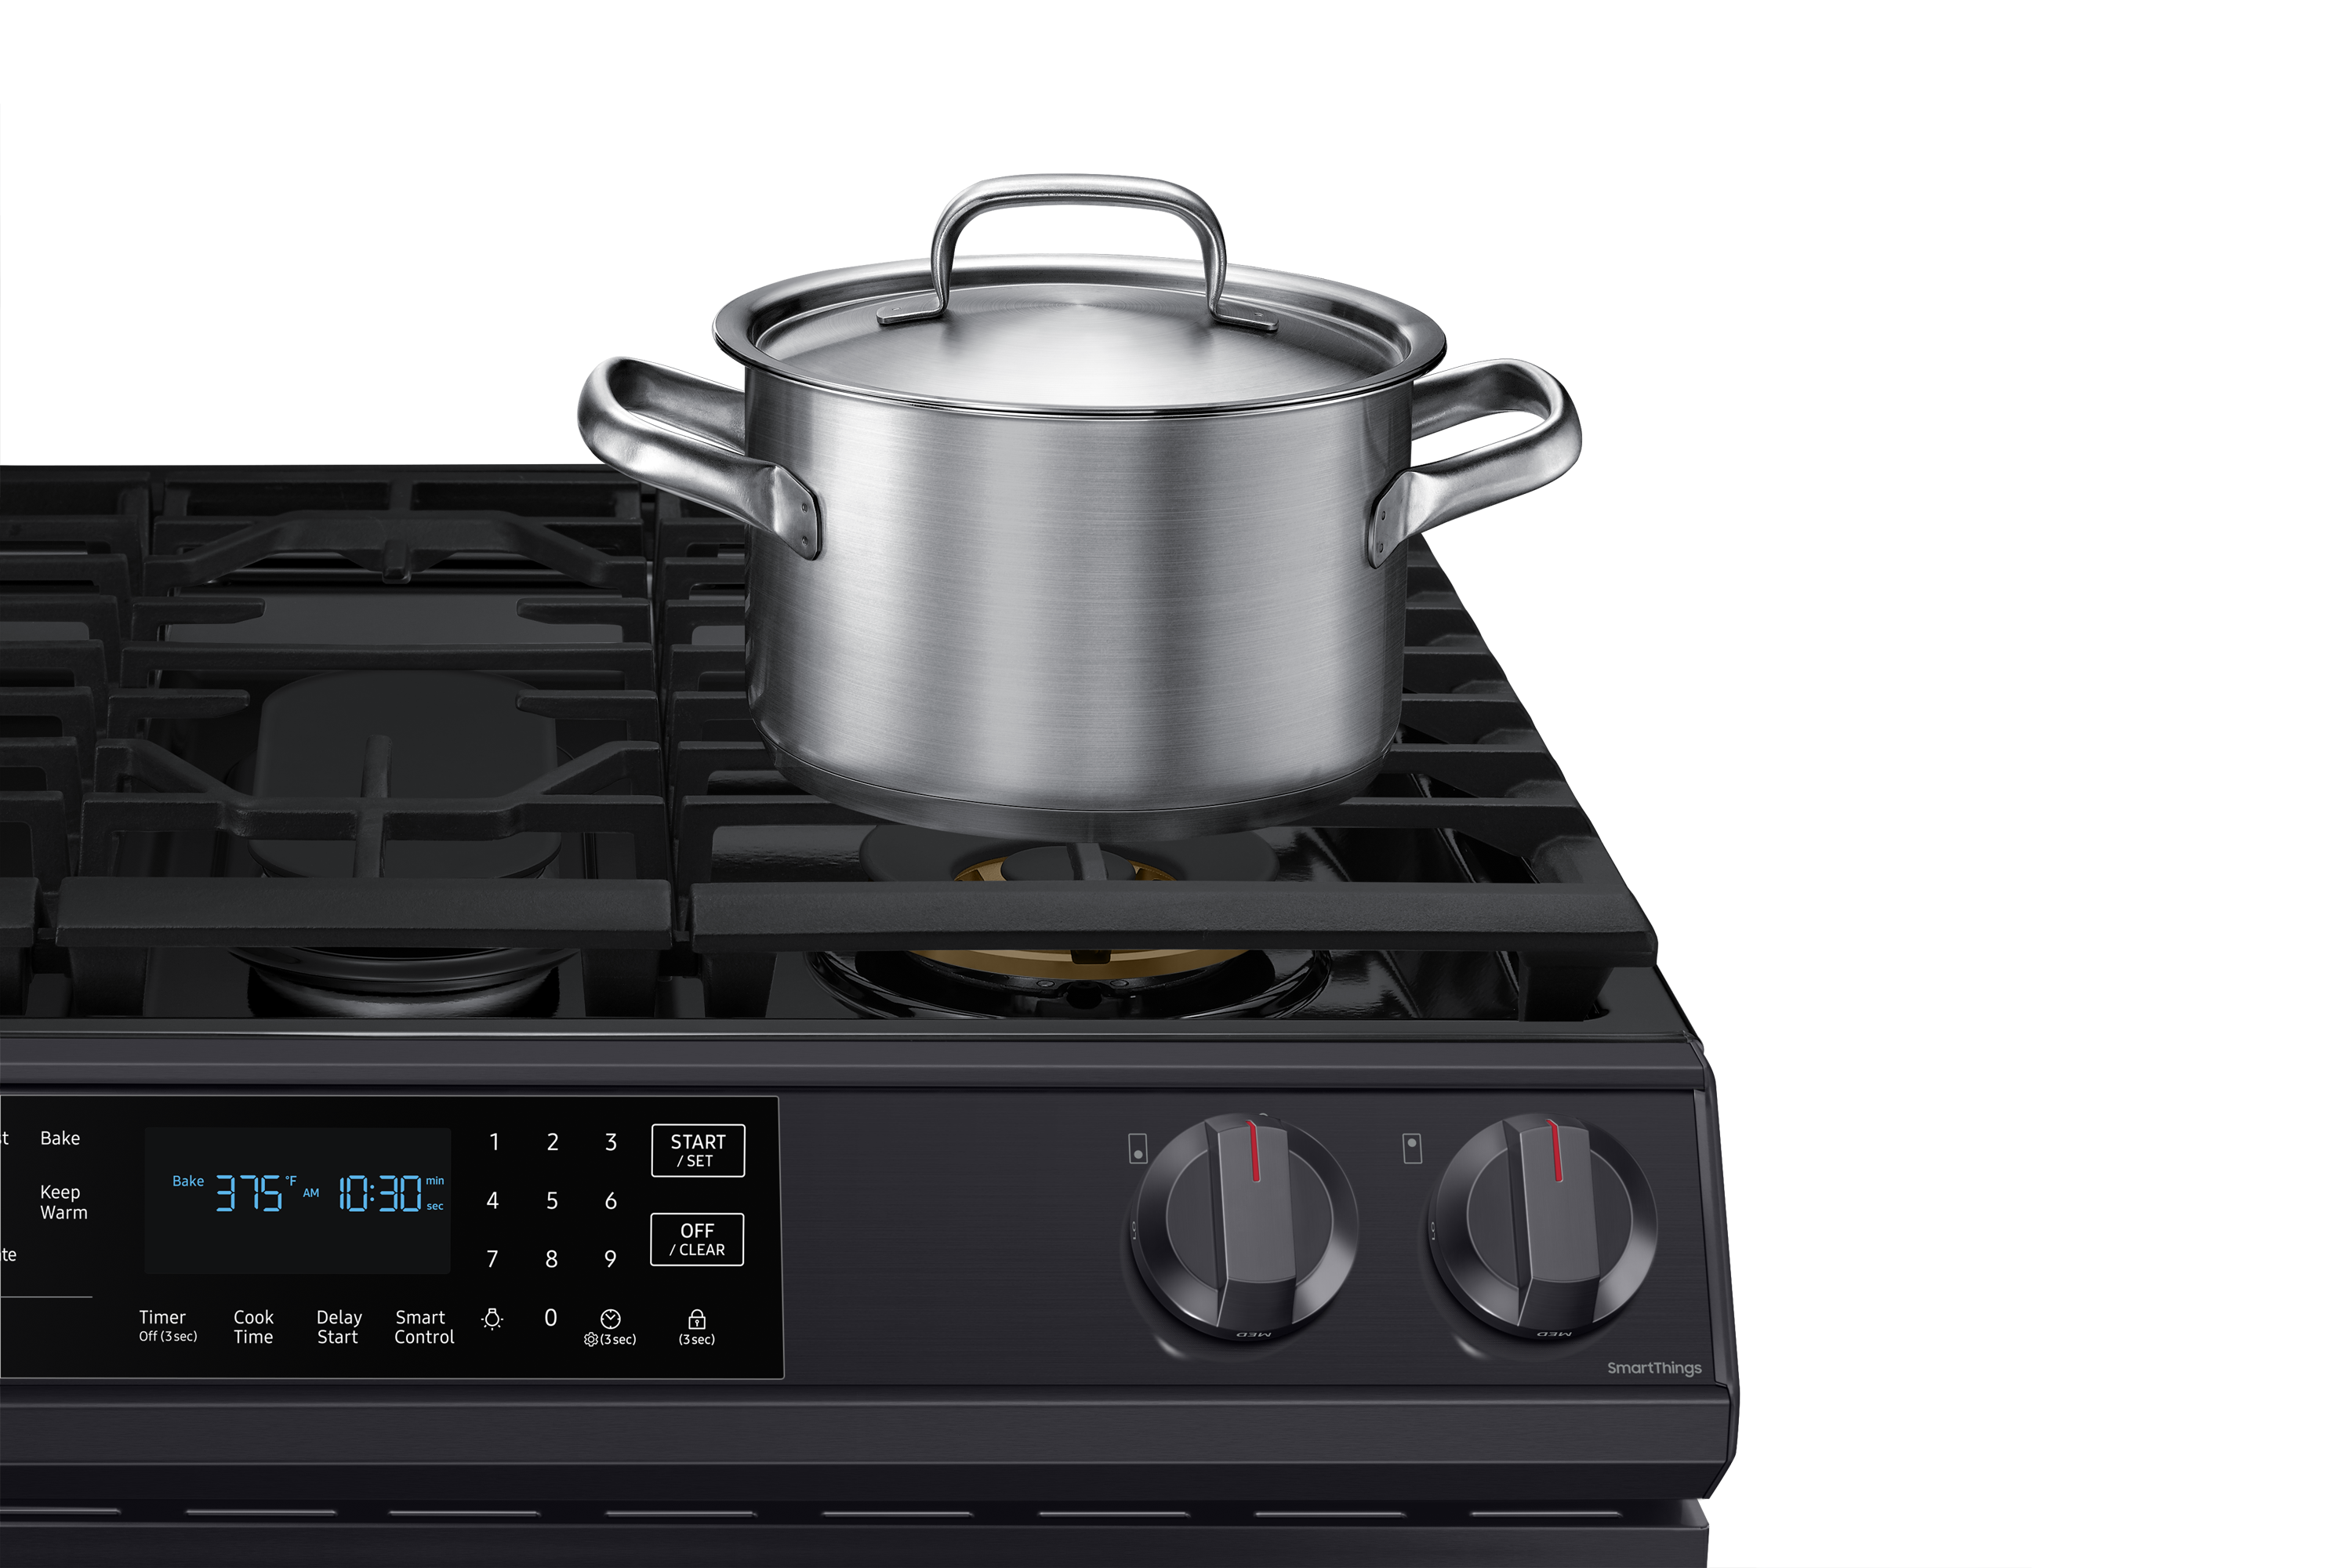 30" Samsung 6.0 Cu. Ft. Gas Range With True Convection And Air Fry in Black Stainless Steel - NX60T8511SG